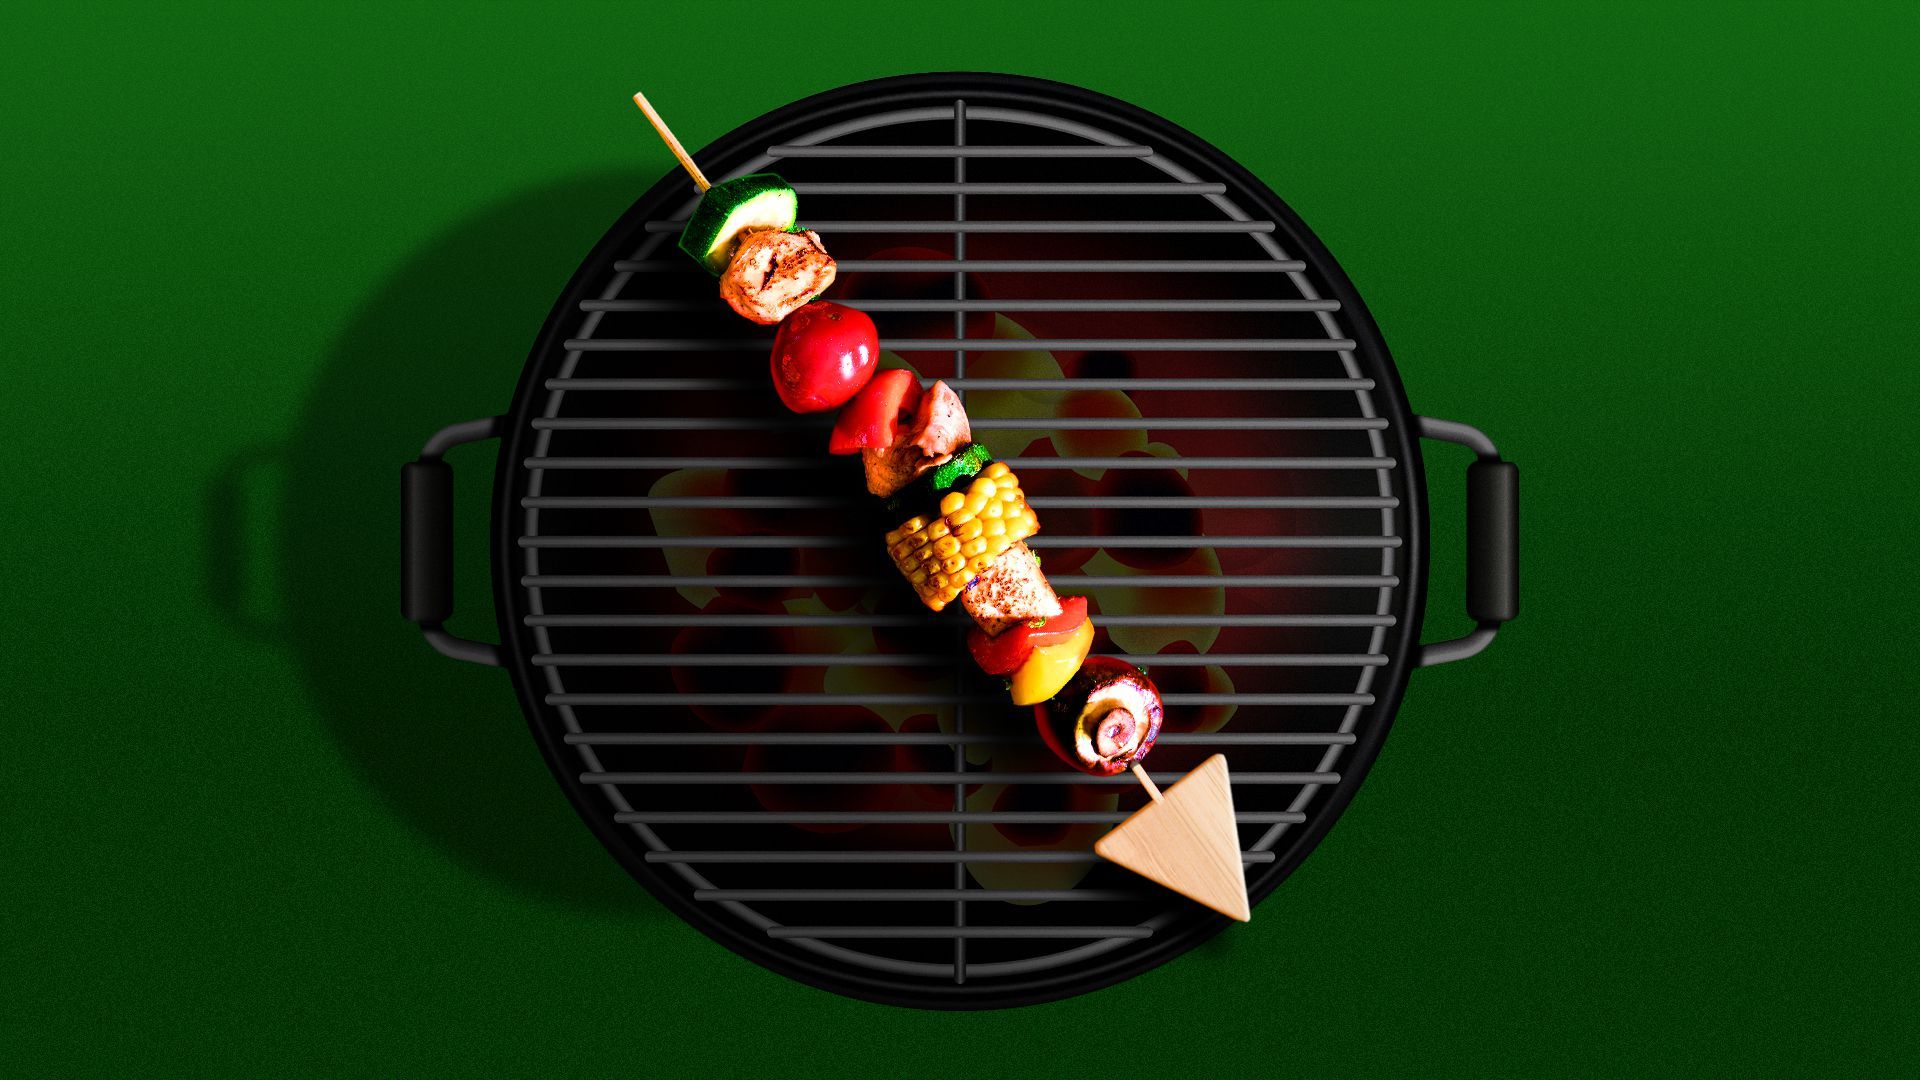 Illustration of a charcoal grill with a kabob shaped like an arrow pointing downward